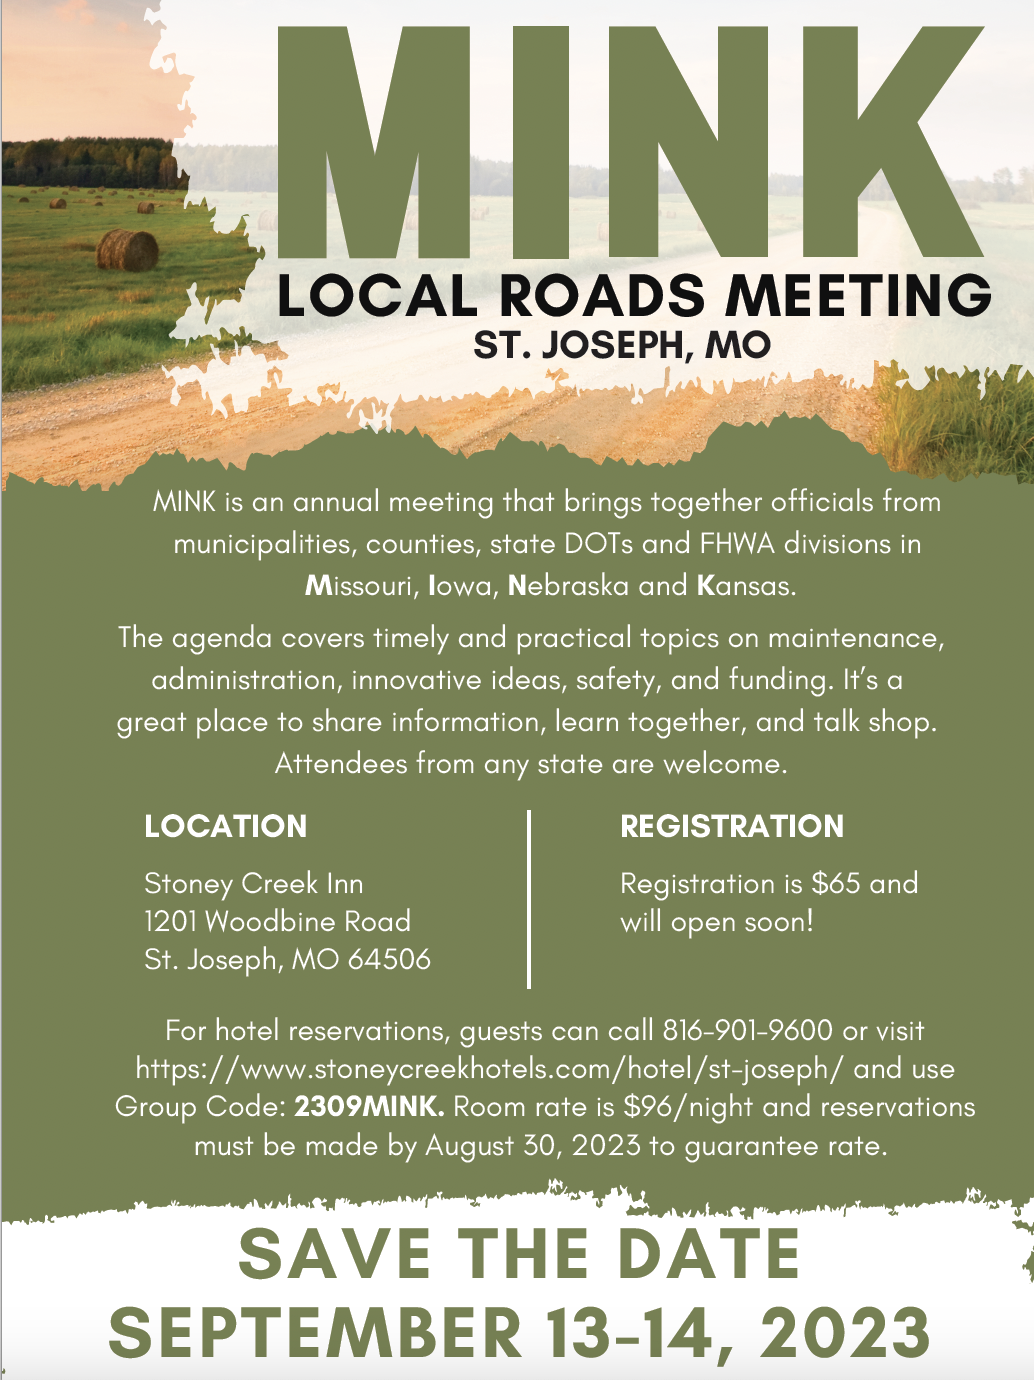 Join us at MINK for twenty-four hours packed with professional development and regional networking in St. Joseph in September.